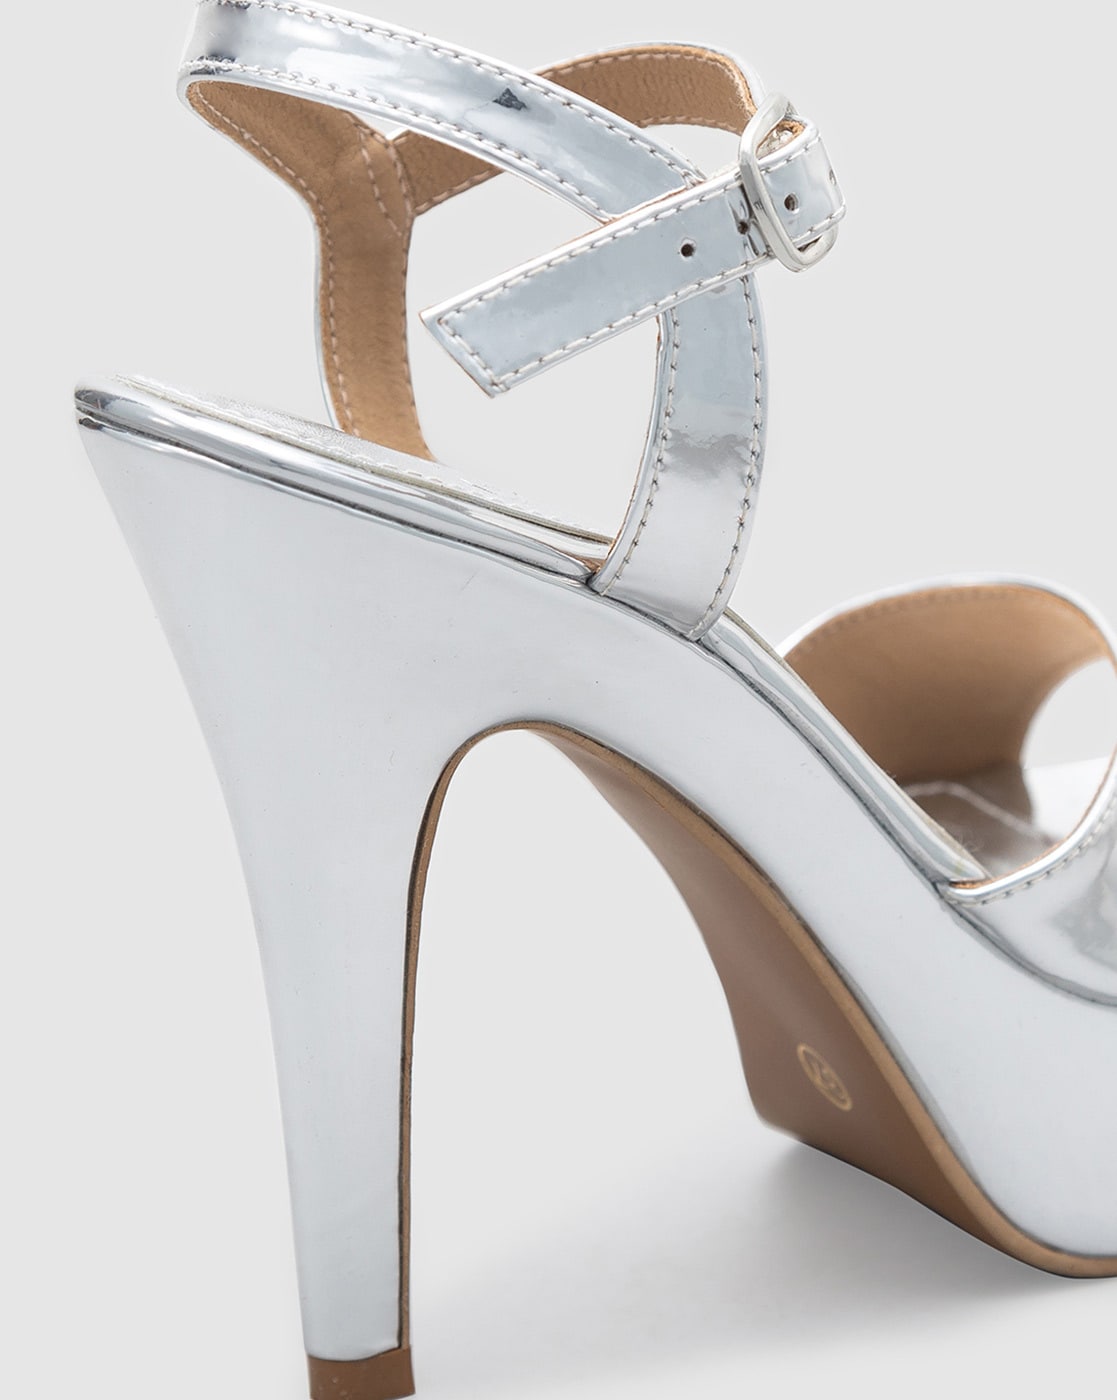 Sparkling Silver Glitter Sparkly Strap Heels With Ankle Strap Platform Pumps  For Weddings, Parties, Cocktail Proms, Quinceaneras, Birthdays 11cm Heel  Height With AB Stones 2022 Collection From Uniquebridalboutique, $85.43 |  DHgate.Com